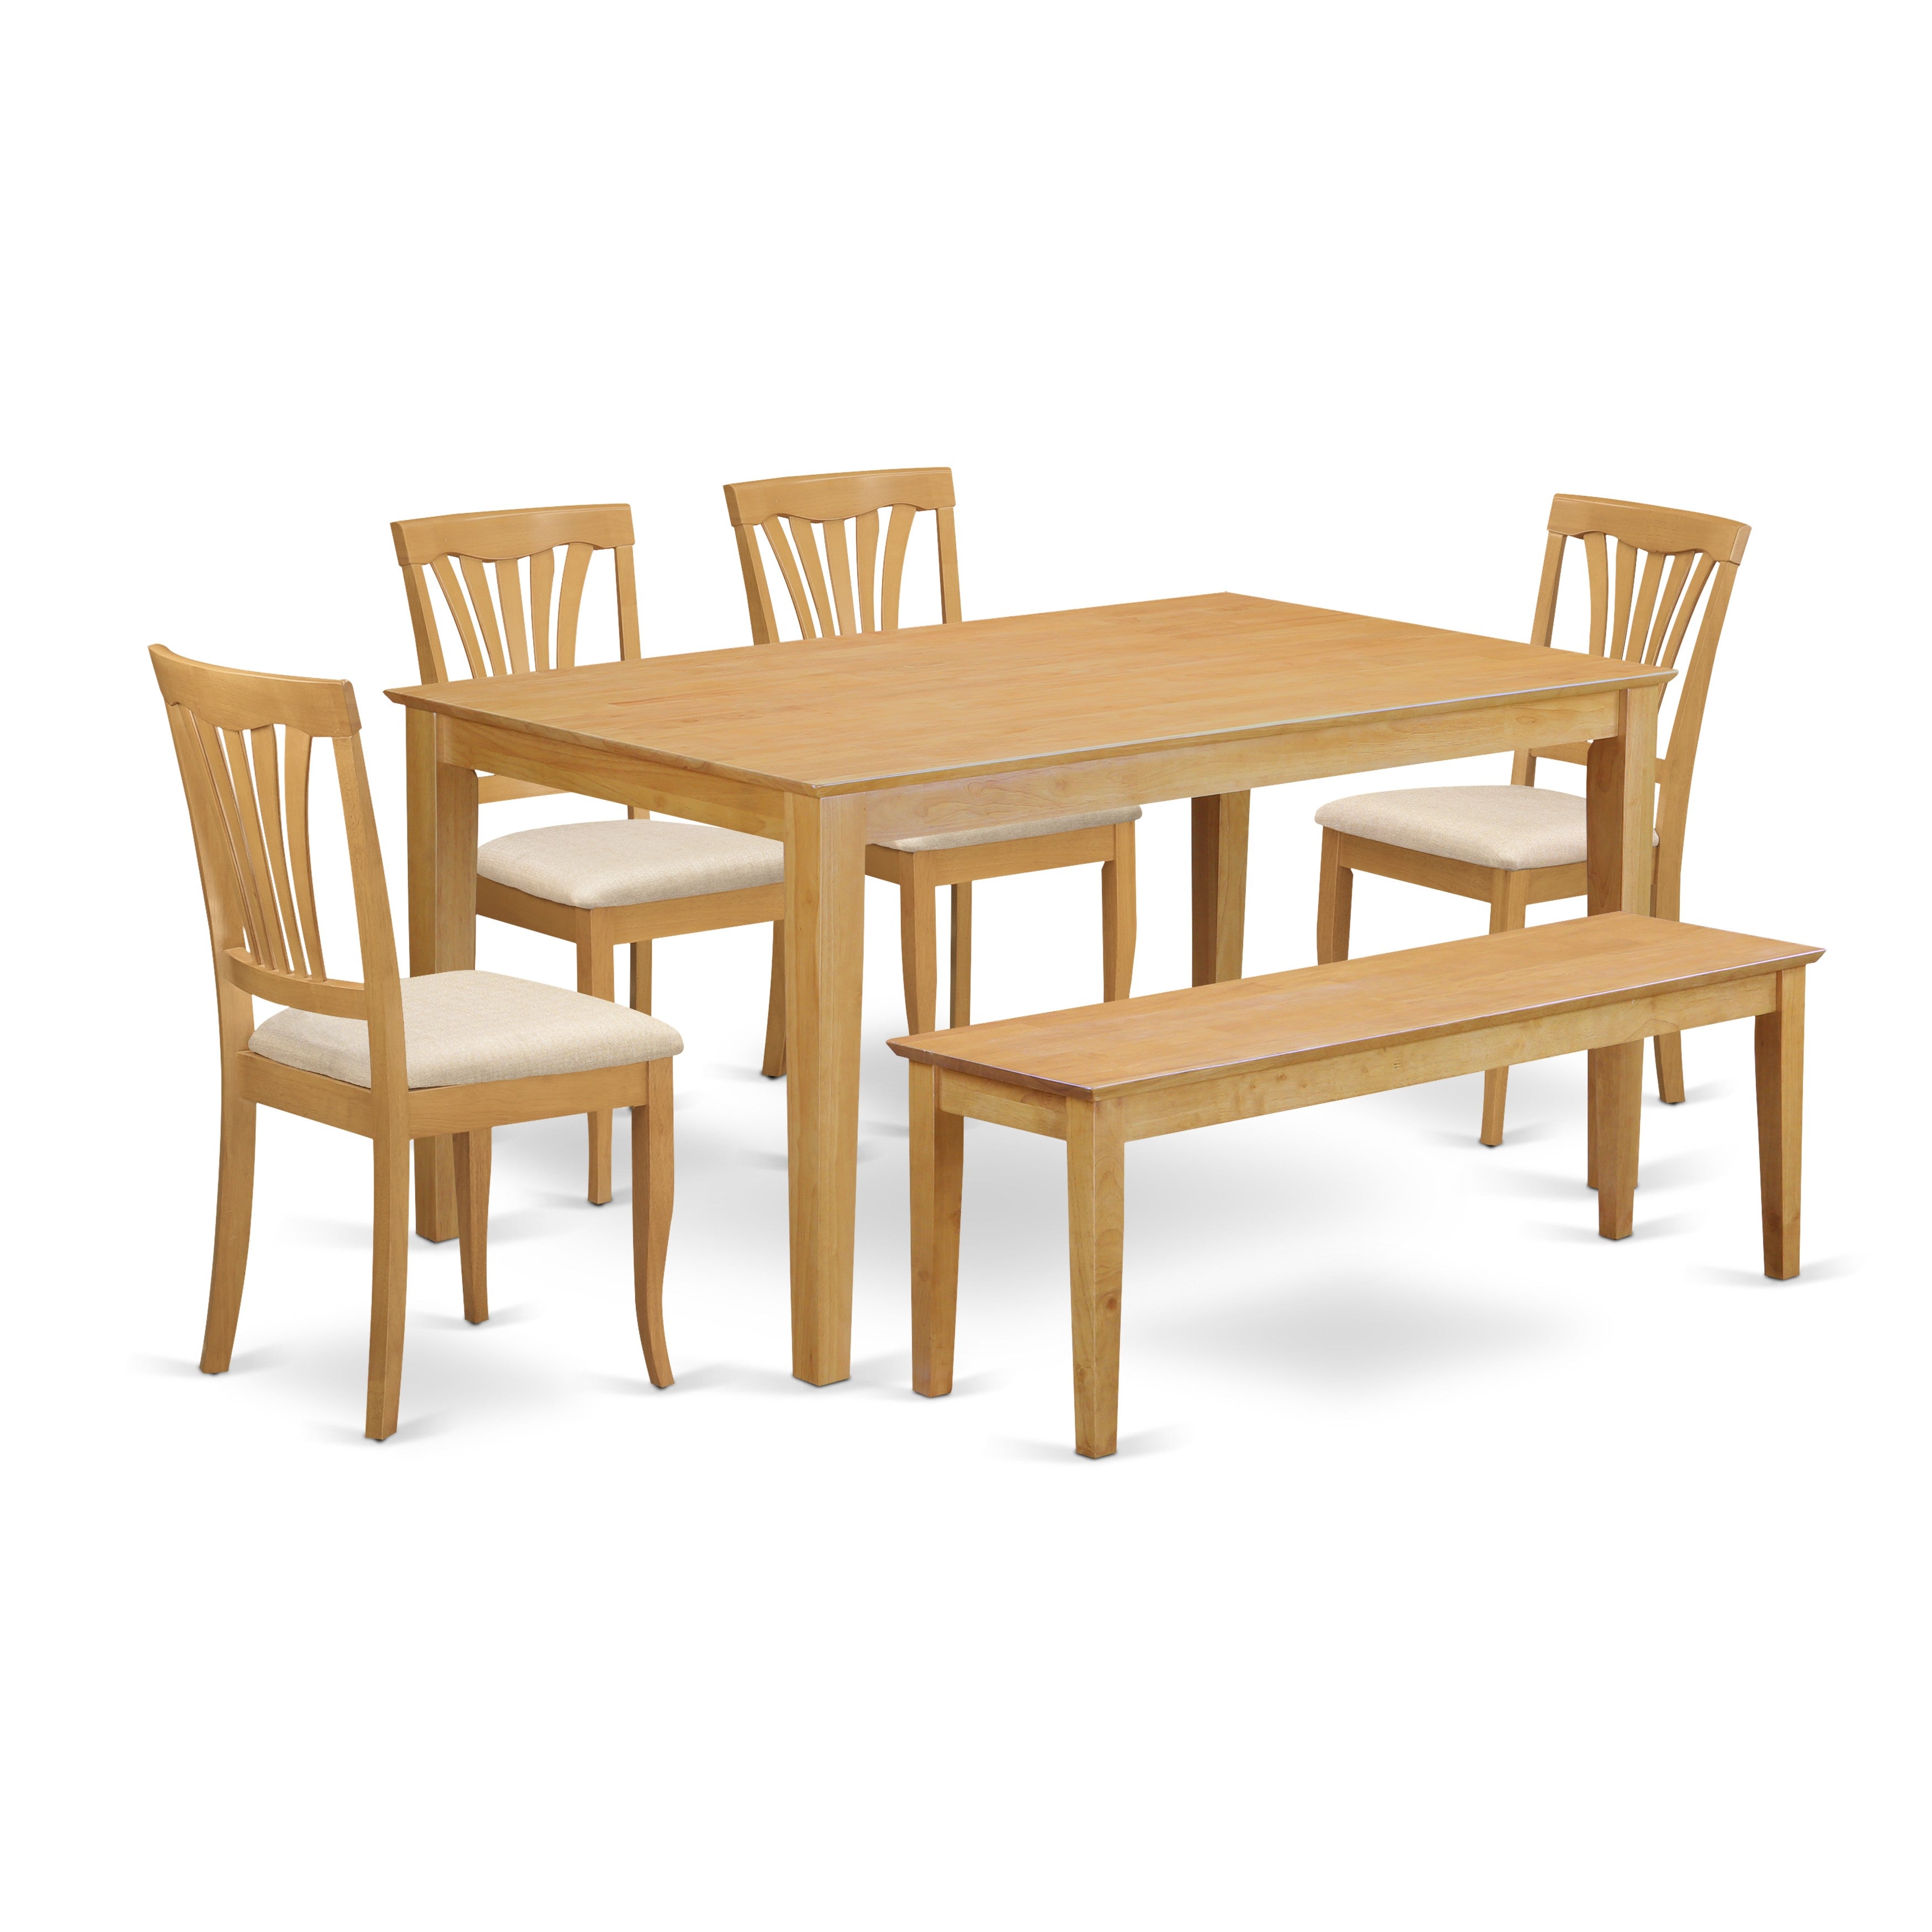 CAAV6-OAK-C 6-Pc Dinette set - Kitchen dinette Table and 4 Dining Chairs plus Wooden bench